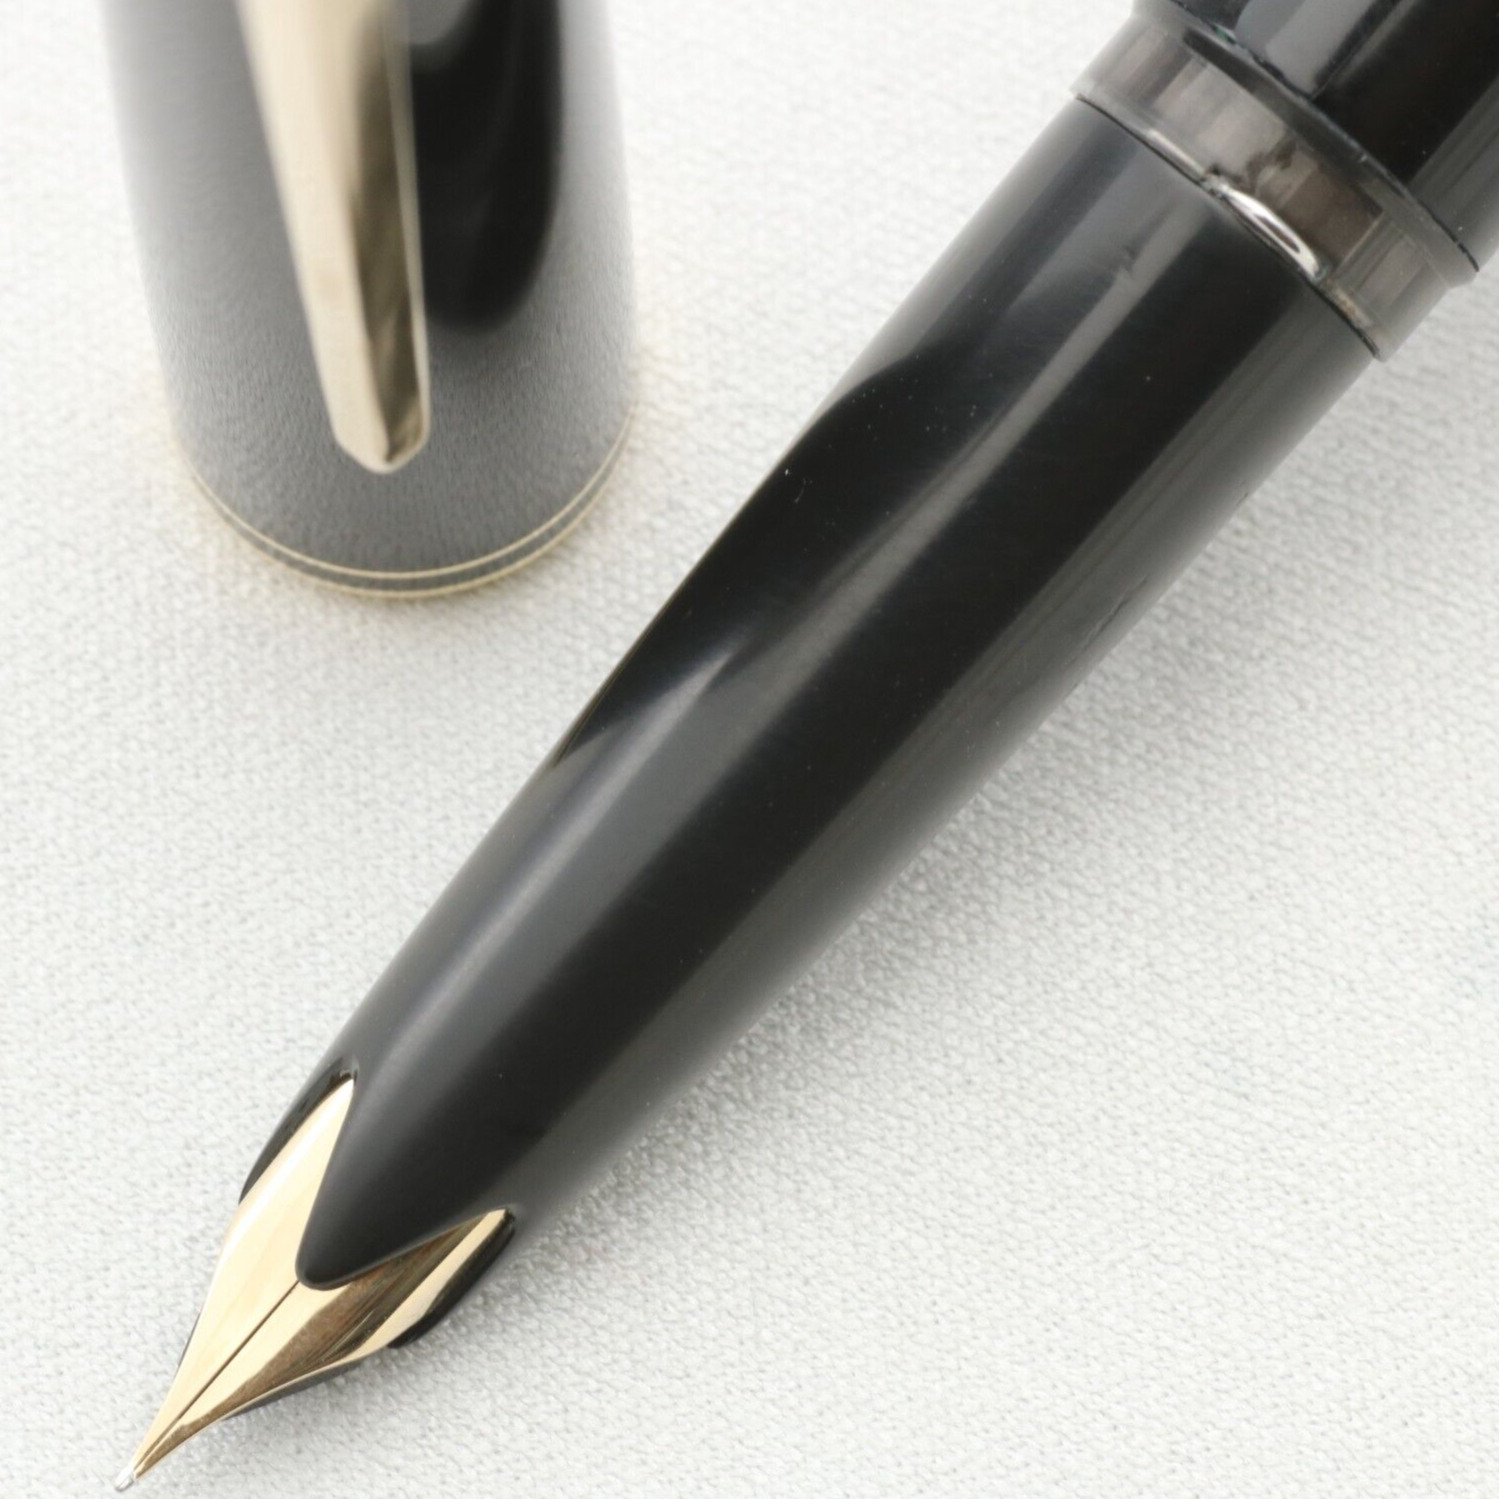 Montblanc 221 Early 1970s VTG 14K EF Wing Nib Used in Japan Fountain Pen [059]